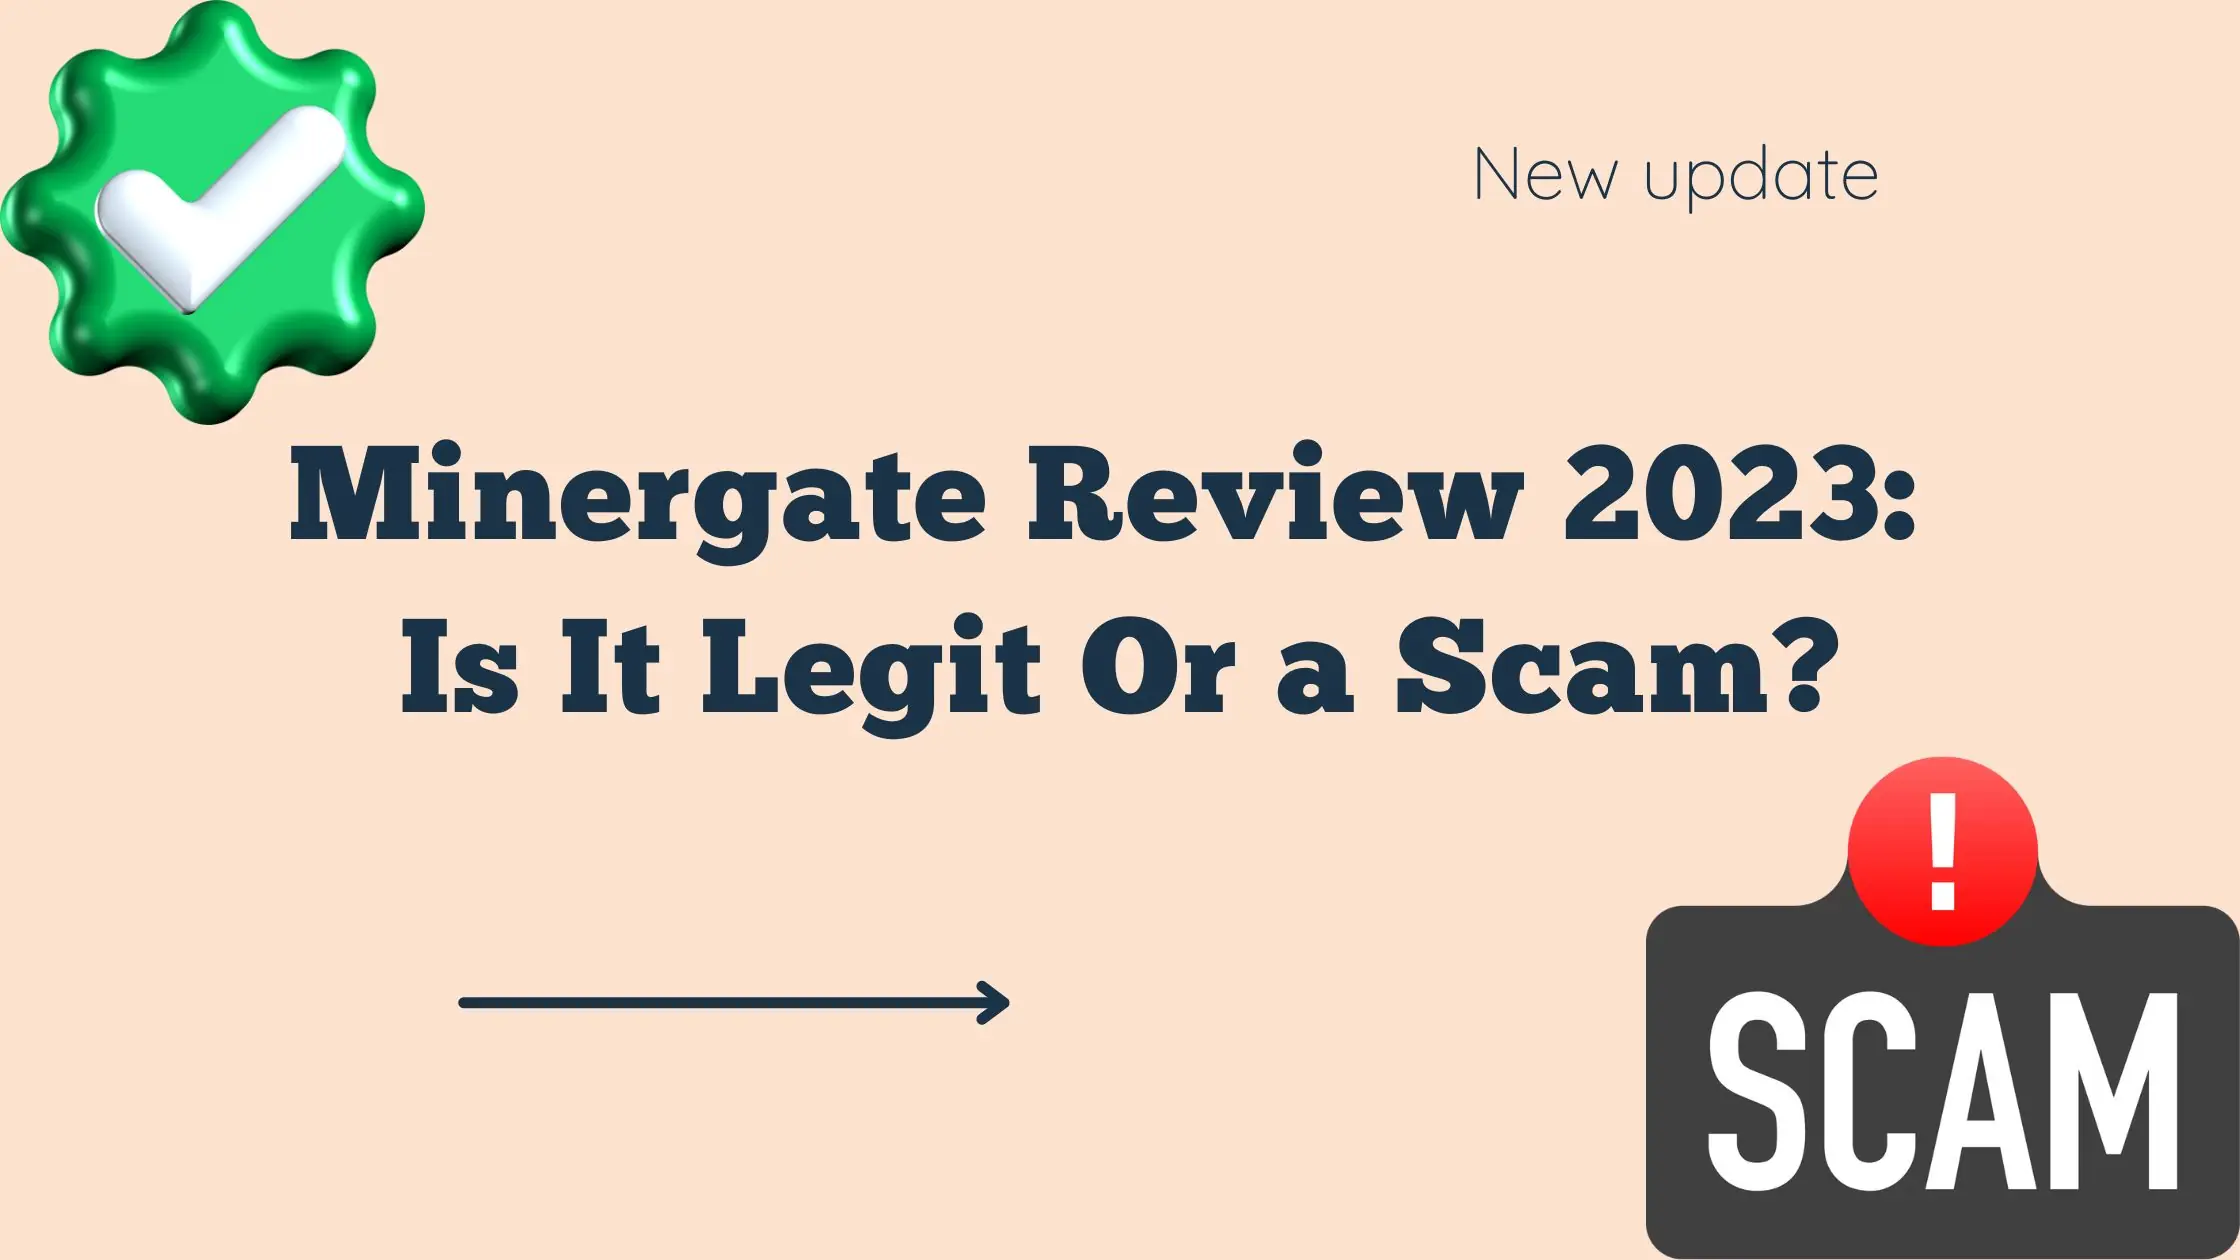 Minergate Review 2023: Is It Legit Or a Scam?